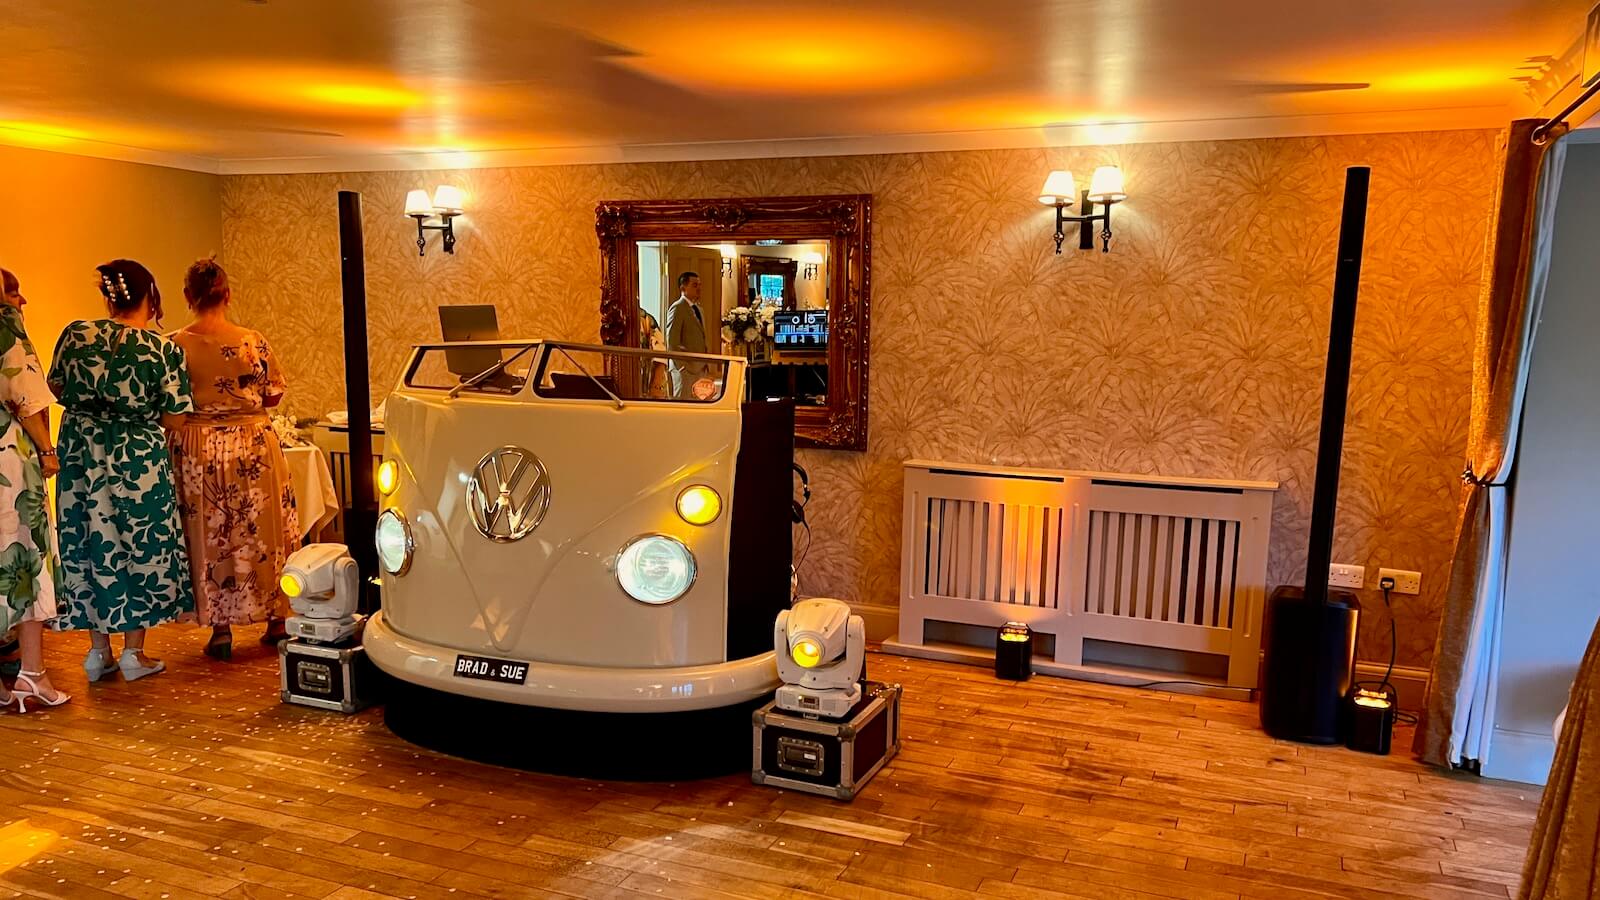 vw dj booth all set for a wedding party